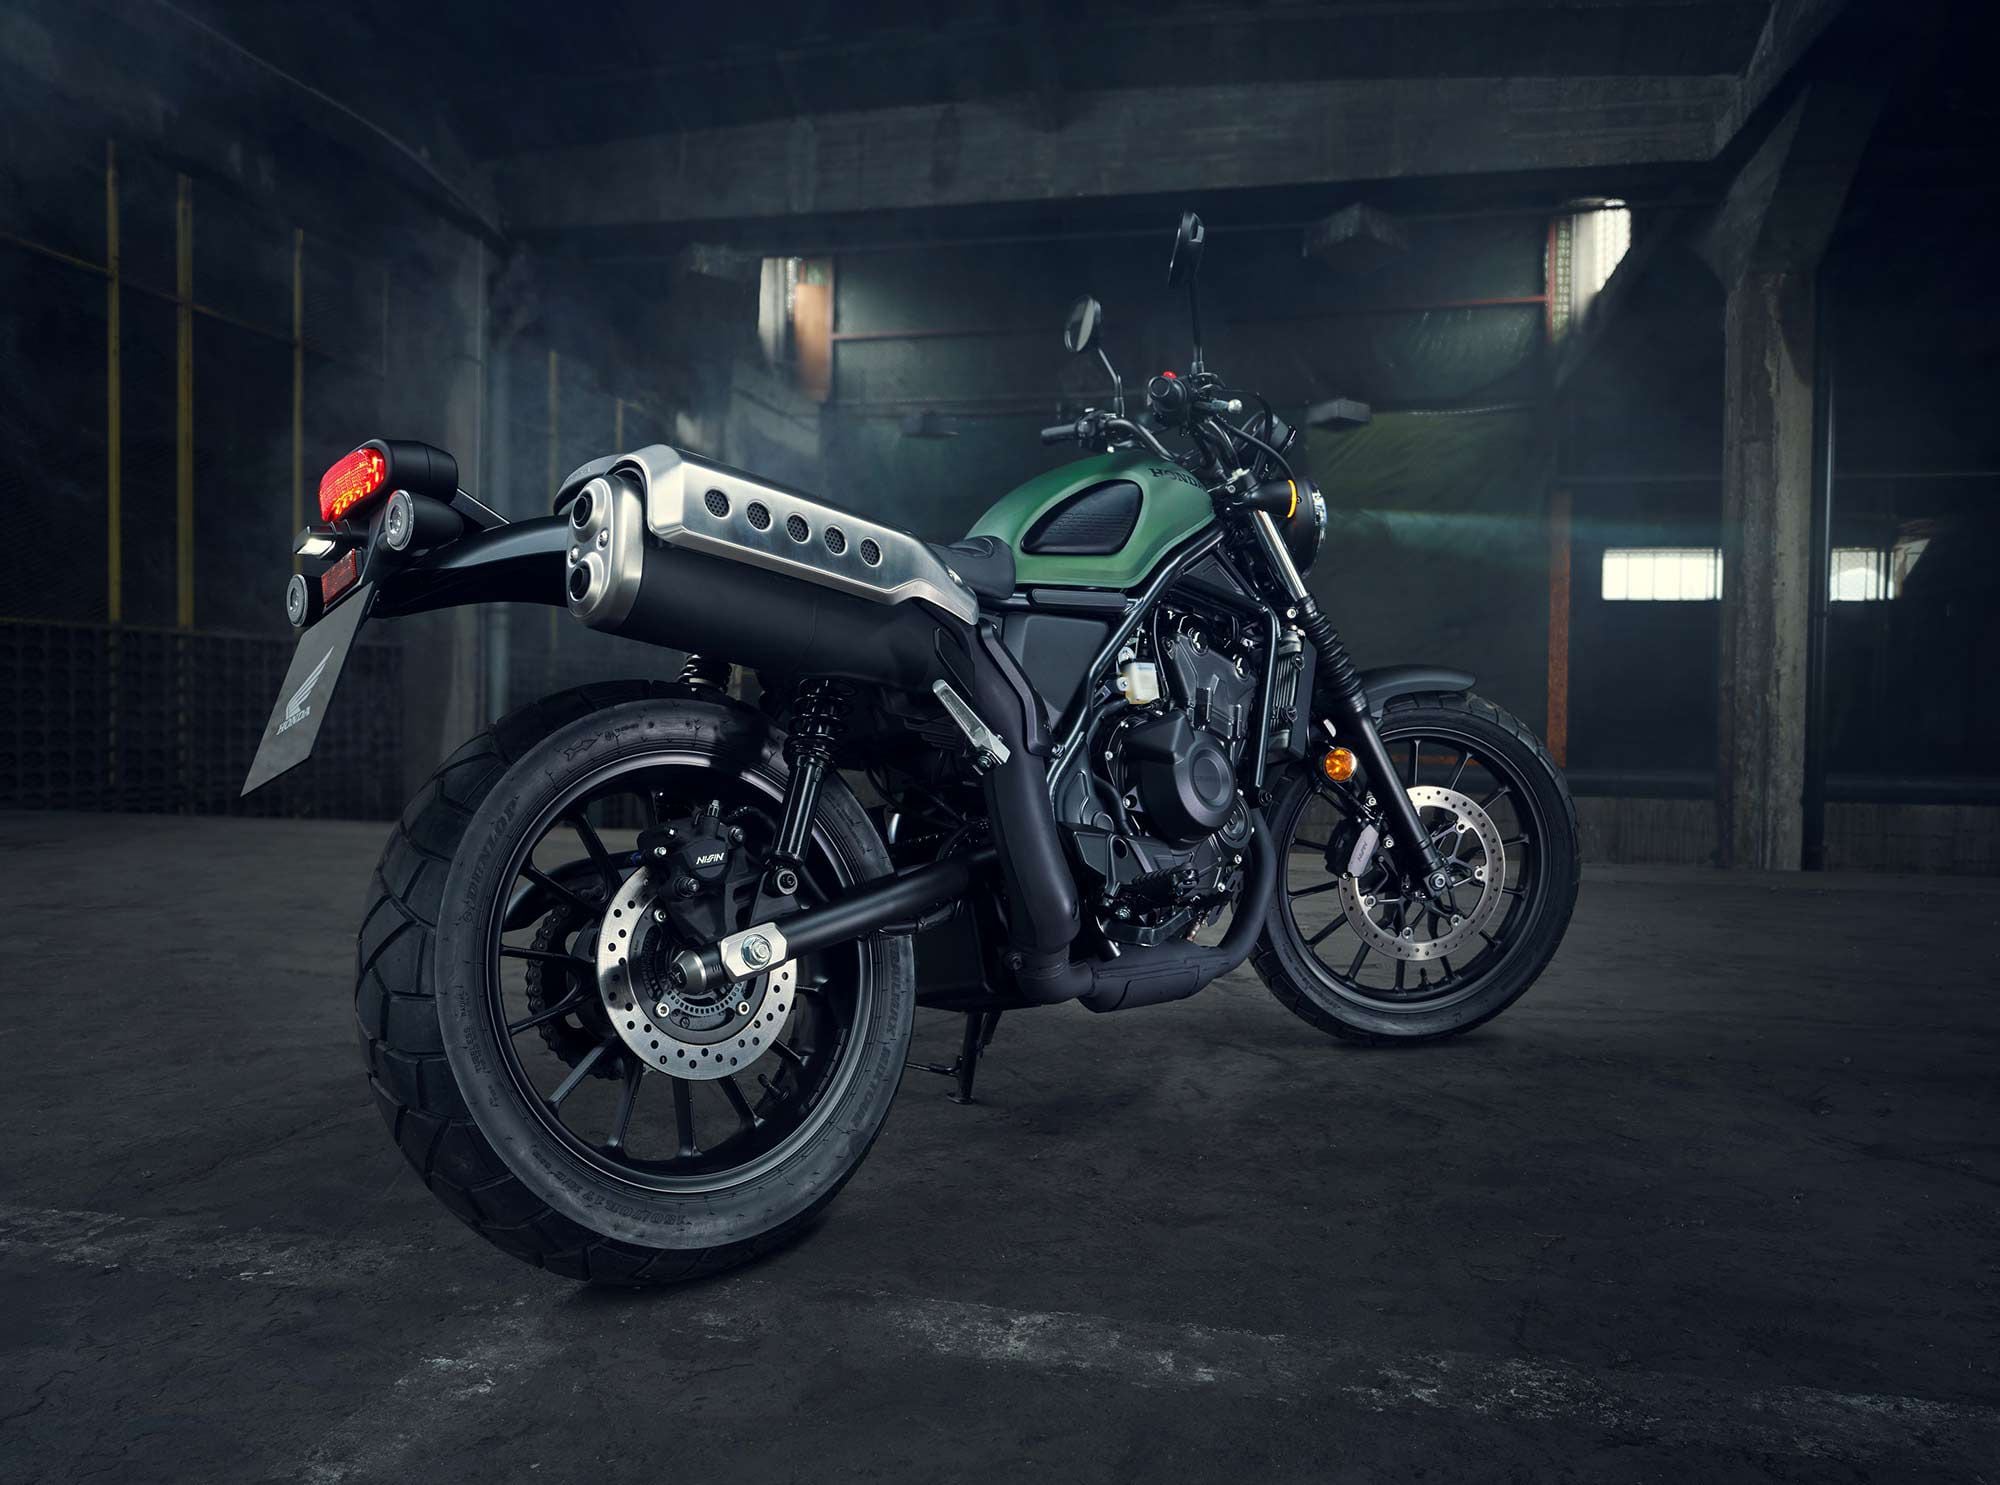 The new CL500 has all the styling attributes of a street scrambler.